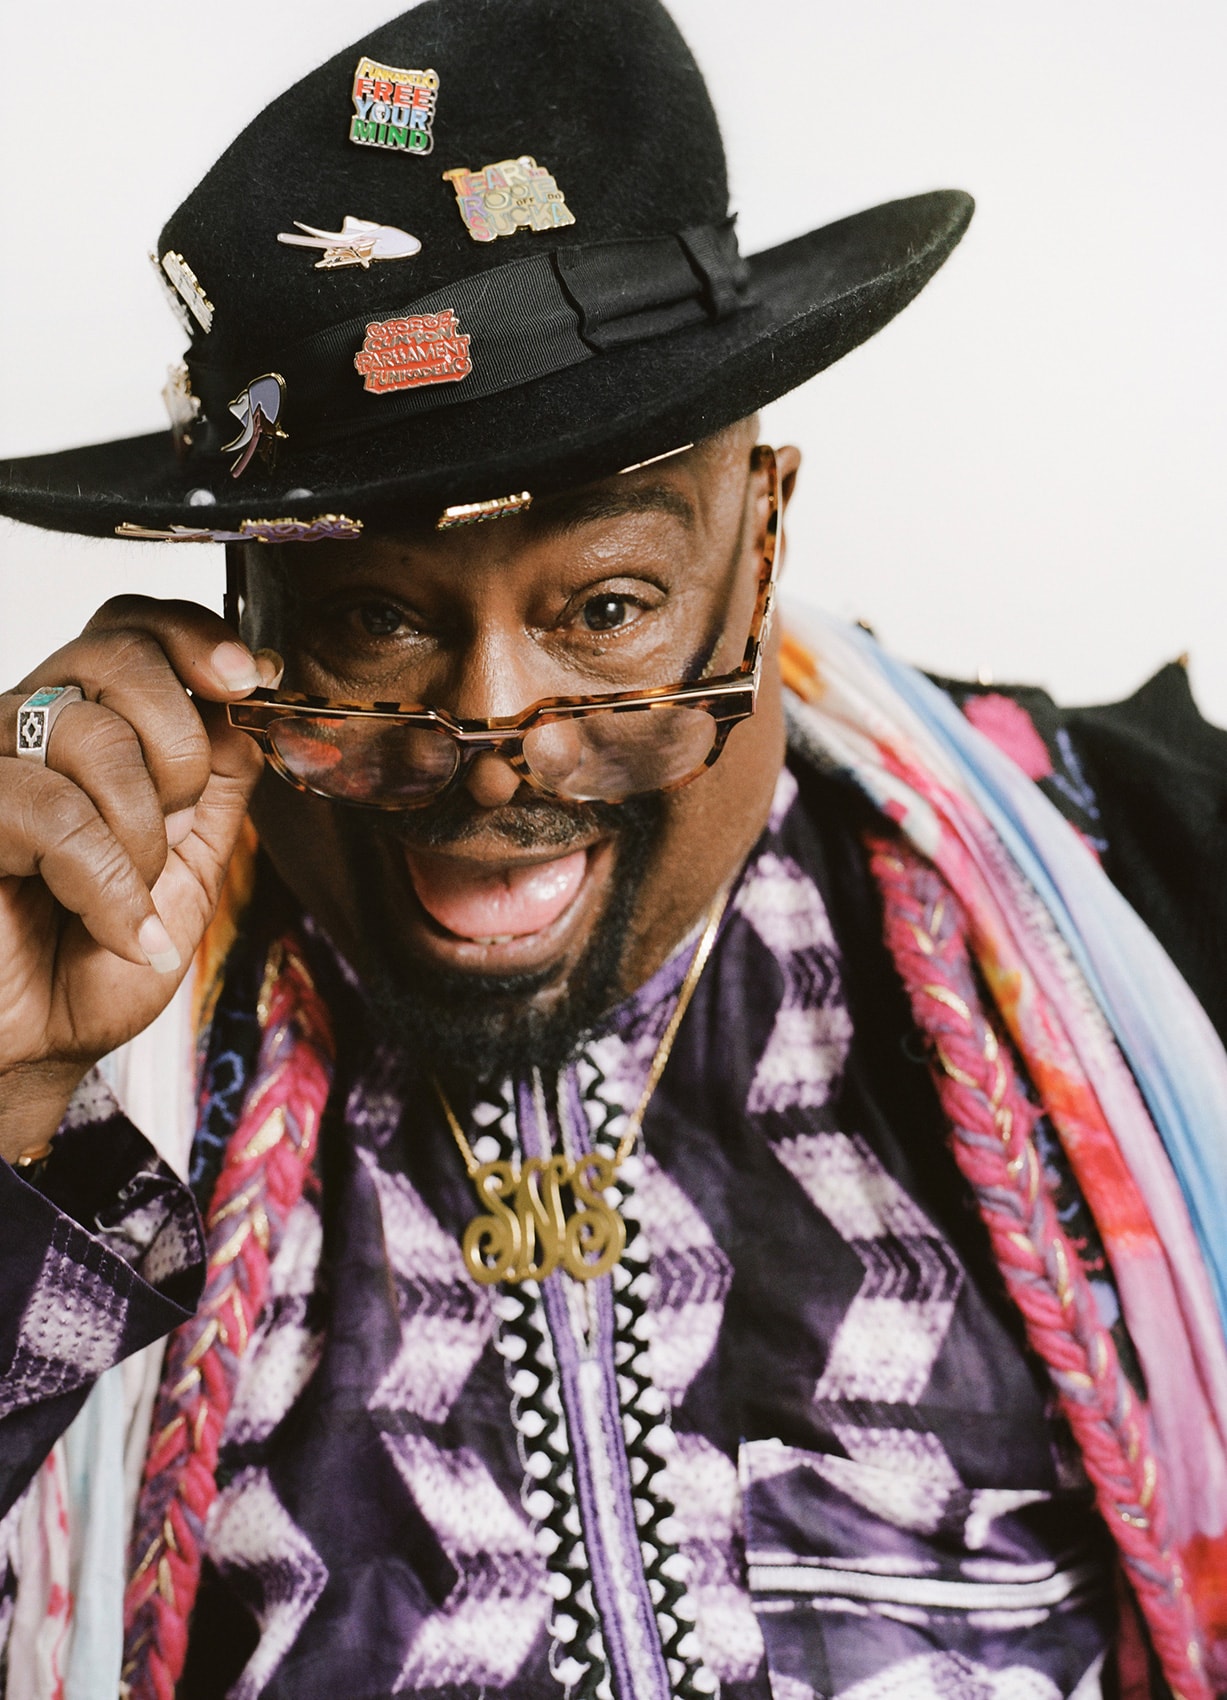 Sneakersnstuff x adidas originals Yung-1 George Clinton campaign photos video shaniqwa jarvis